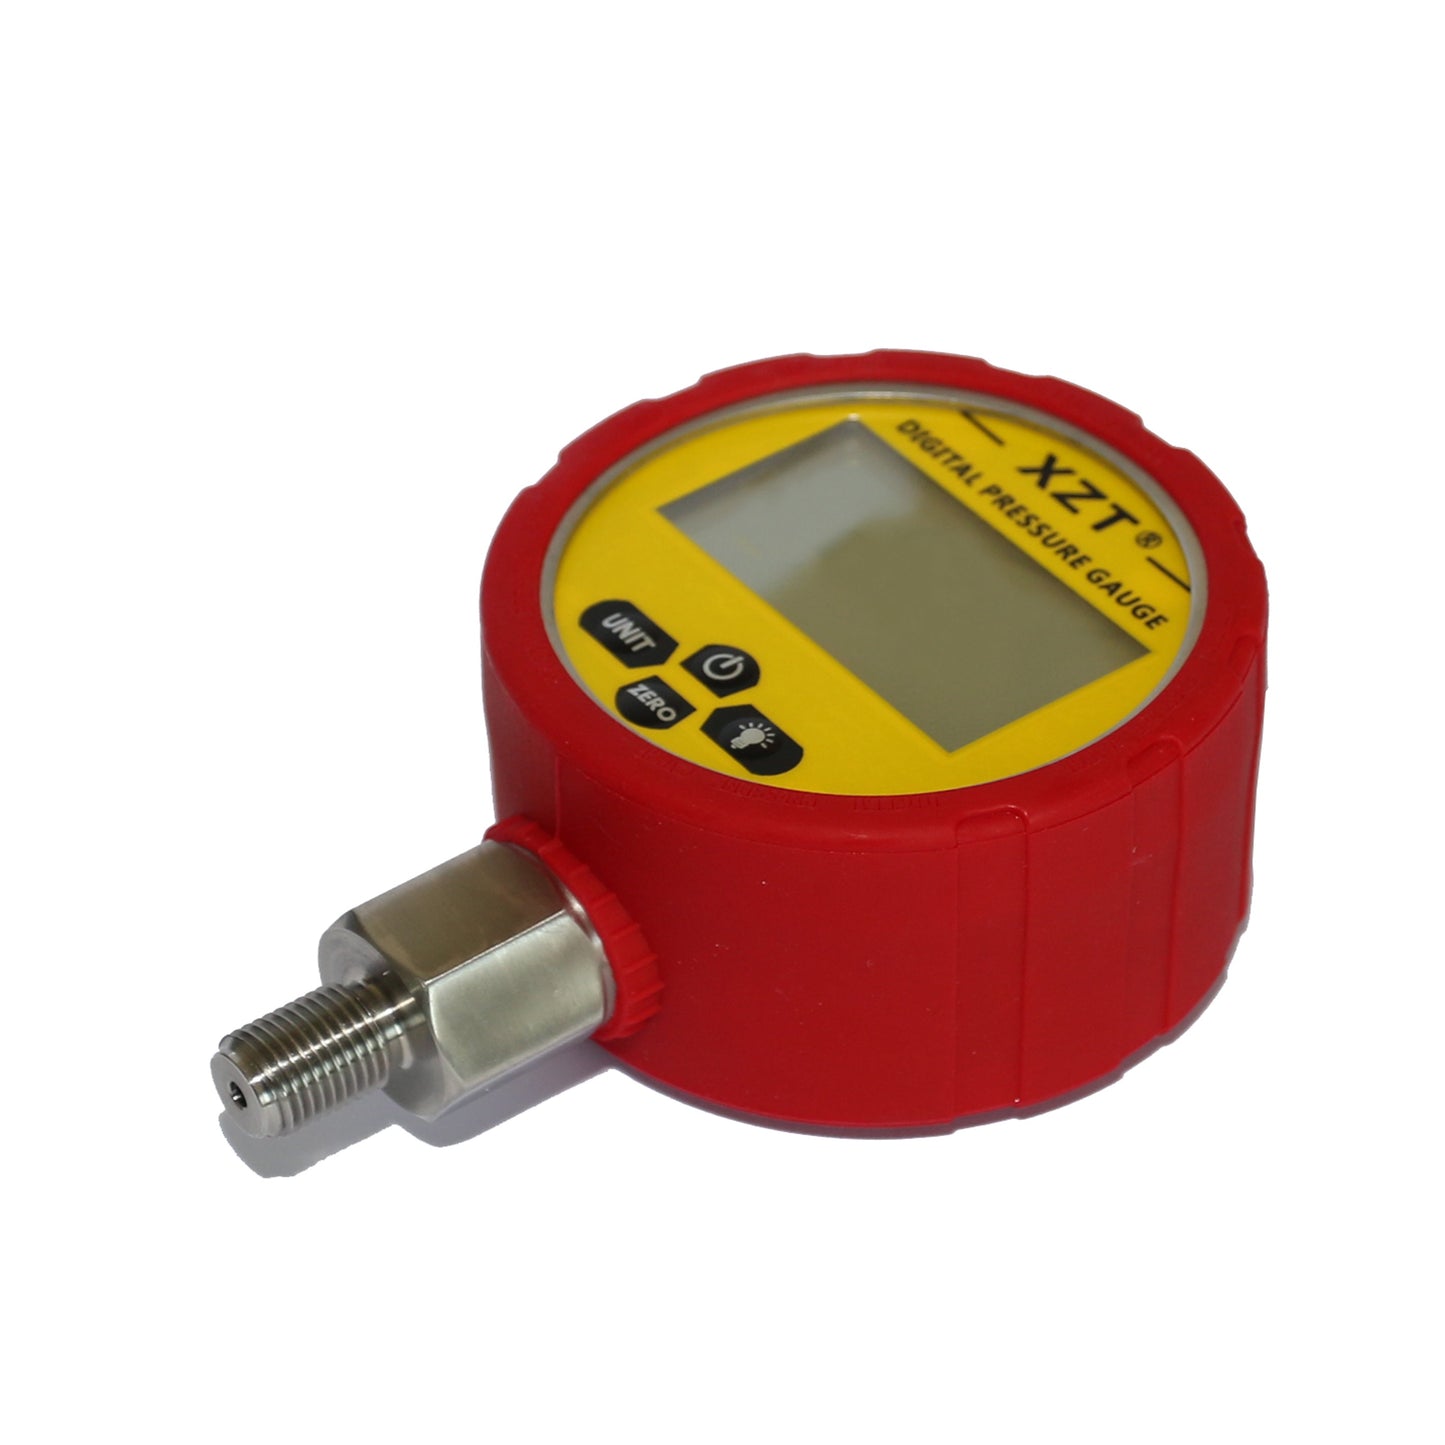 XZT 3.15" -1BAR/15 PSI~700BAR/10000 PSI Digital Hydraulic Pressure Gauge with Red Protector,1/4" NPT male connector -Base Entry, Pressure Manometer, Pressure Sensor Connector